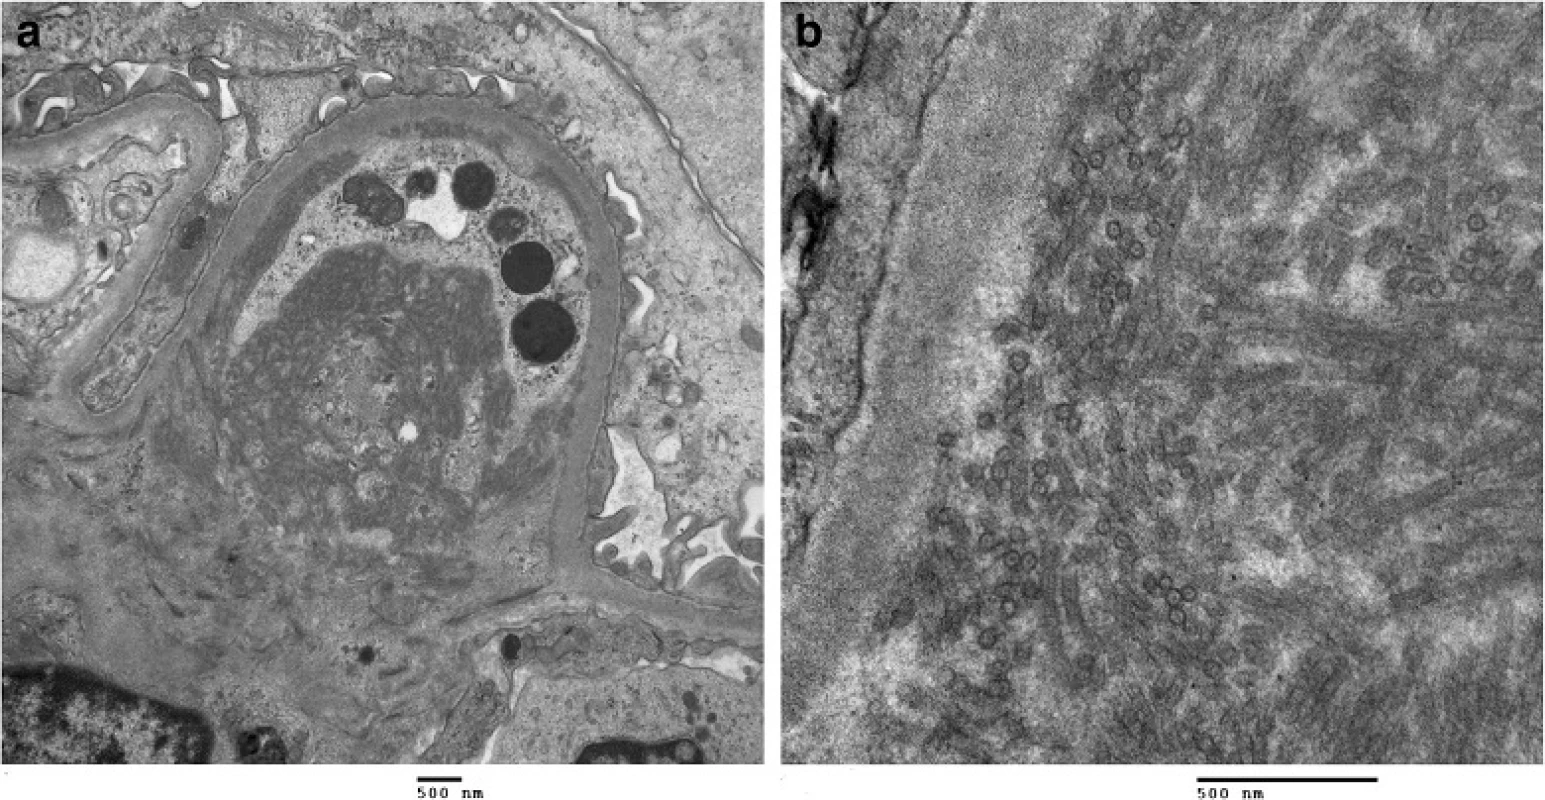 Kidney biopsy. a Kidney biopsy histology with H&amp;E staining shows an increased lobular pattern with mesangial expansion in the glomeruli. b Electron microscopy images at 15000x and 60000x magnification reveals broad tubular structures located in subendothelial and mesangial areas of the glomeruli, measuring 30 nm in diameter. The kidney biopsy was consistent with ITG